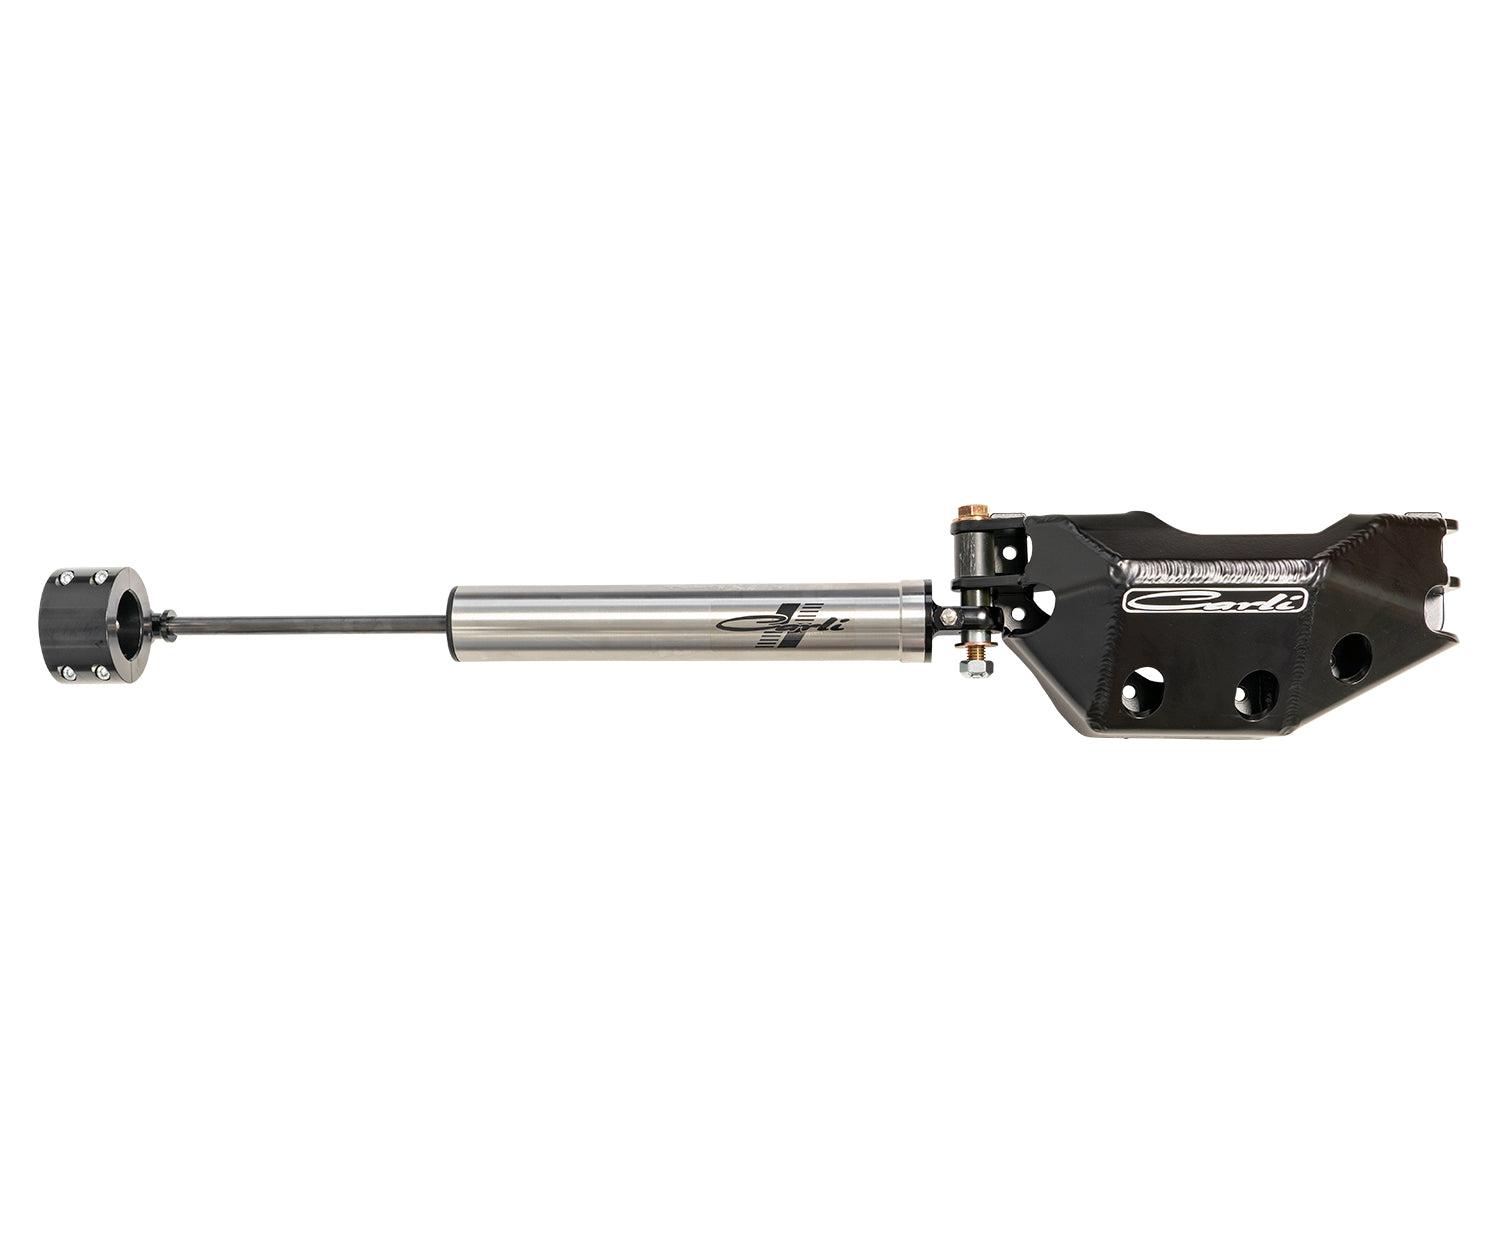 Low Mount Steering Stabilizer w/ Differential Guard